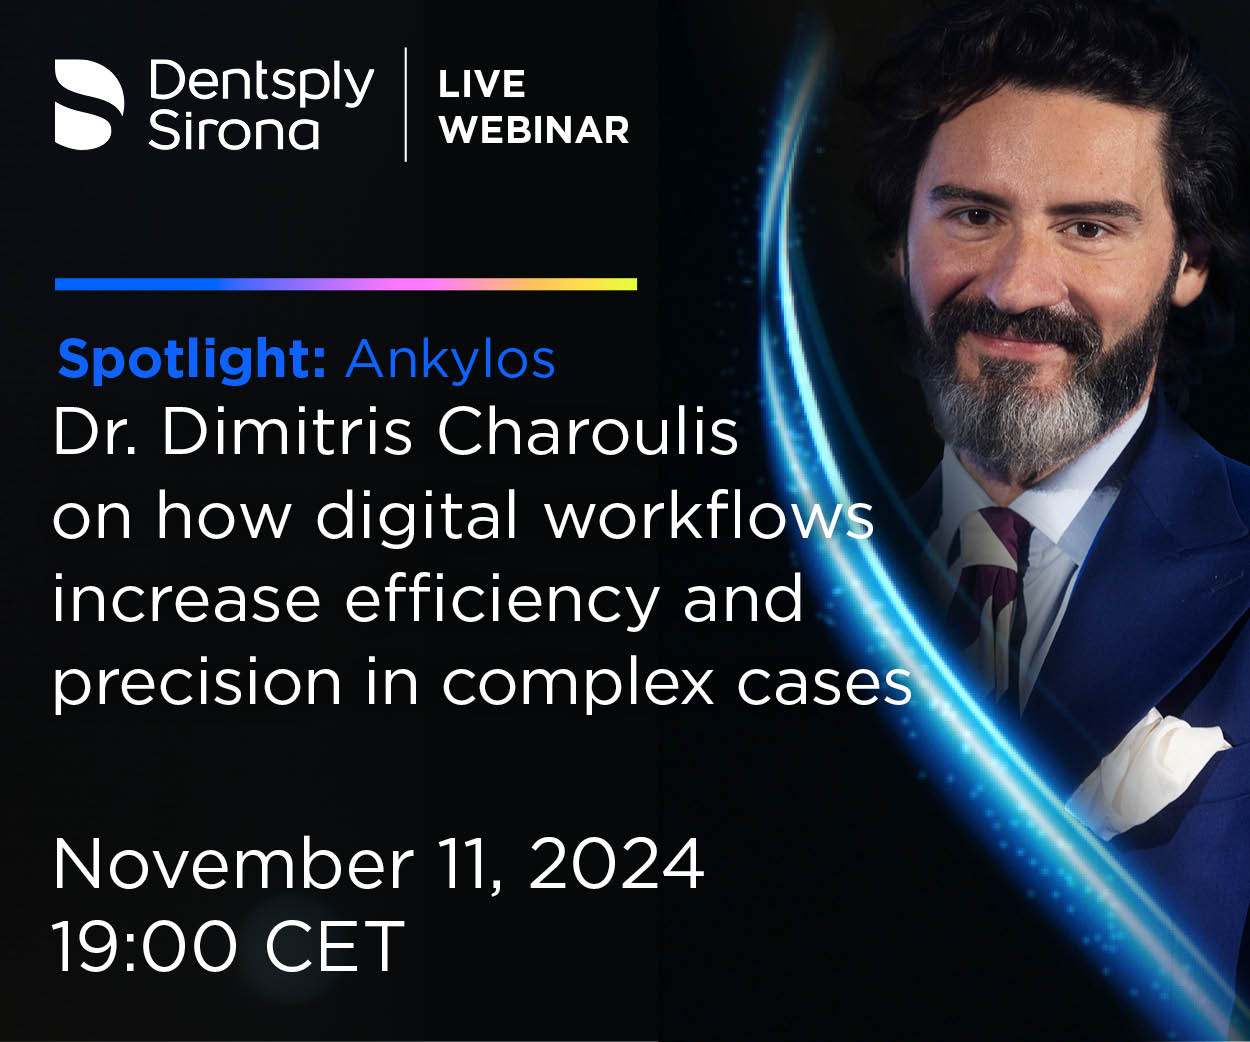 Dr. Dimitris Charoulis on how digital workflows increase efficiency and precision in complex cases. November 11, 2024. 19:00 CET